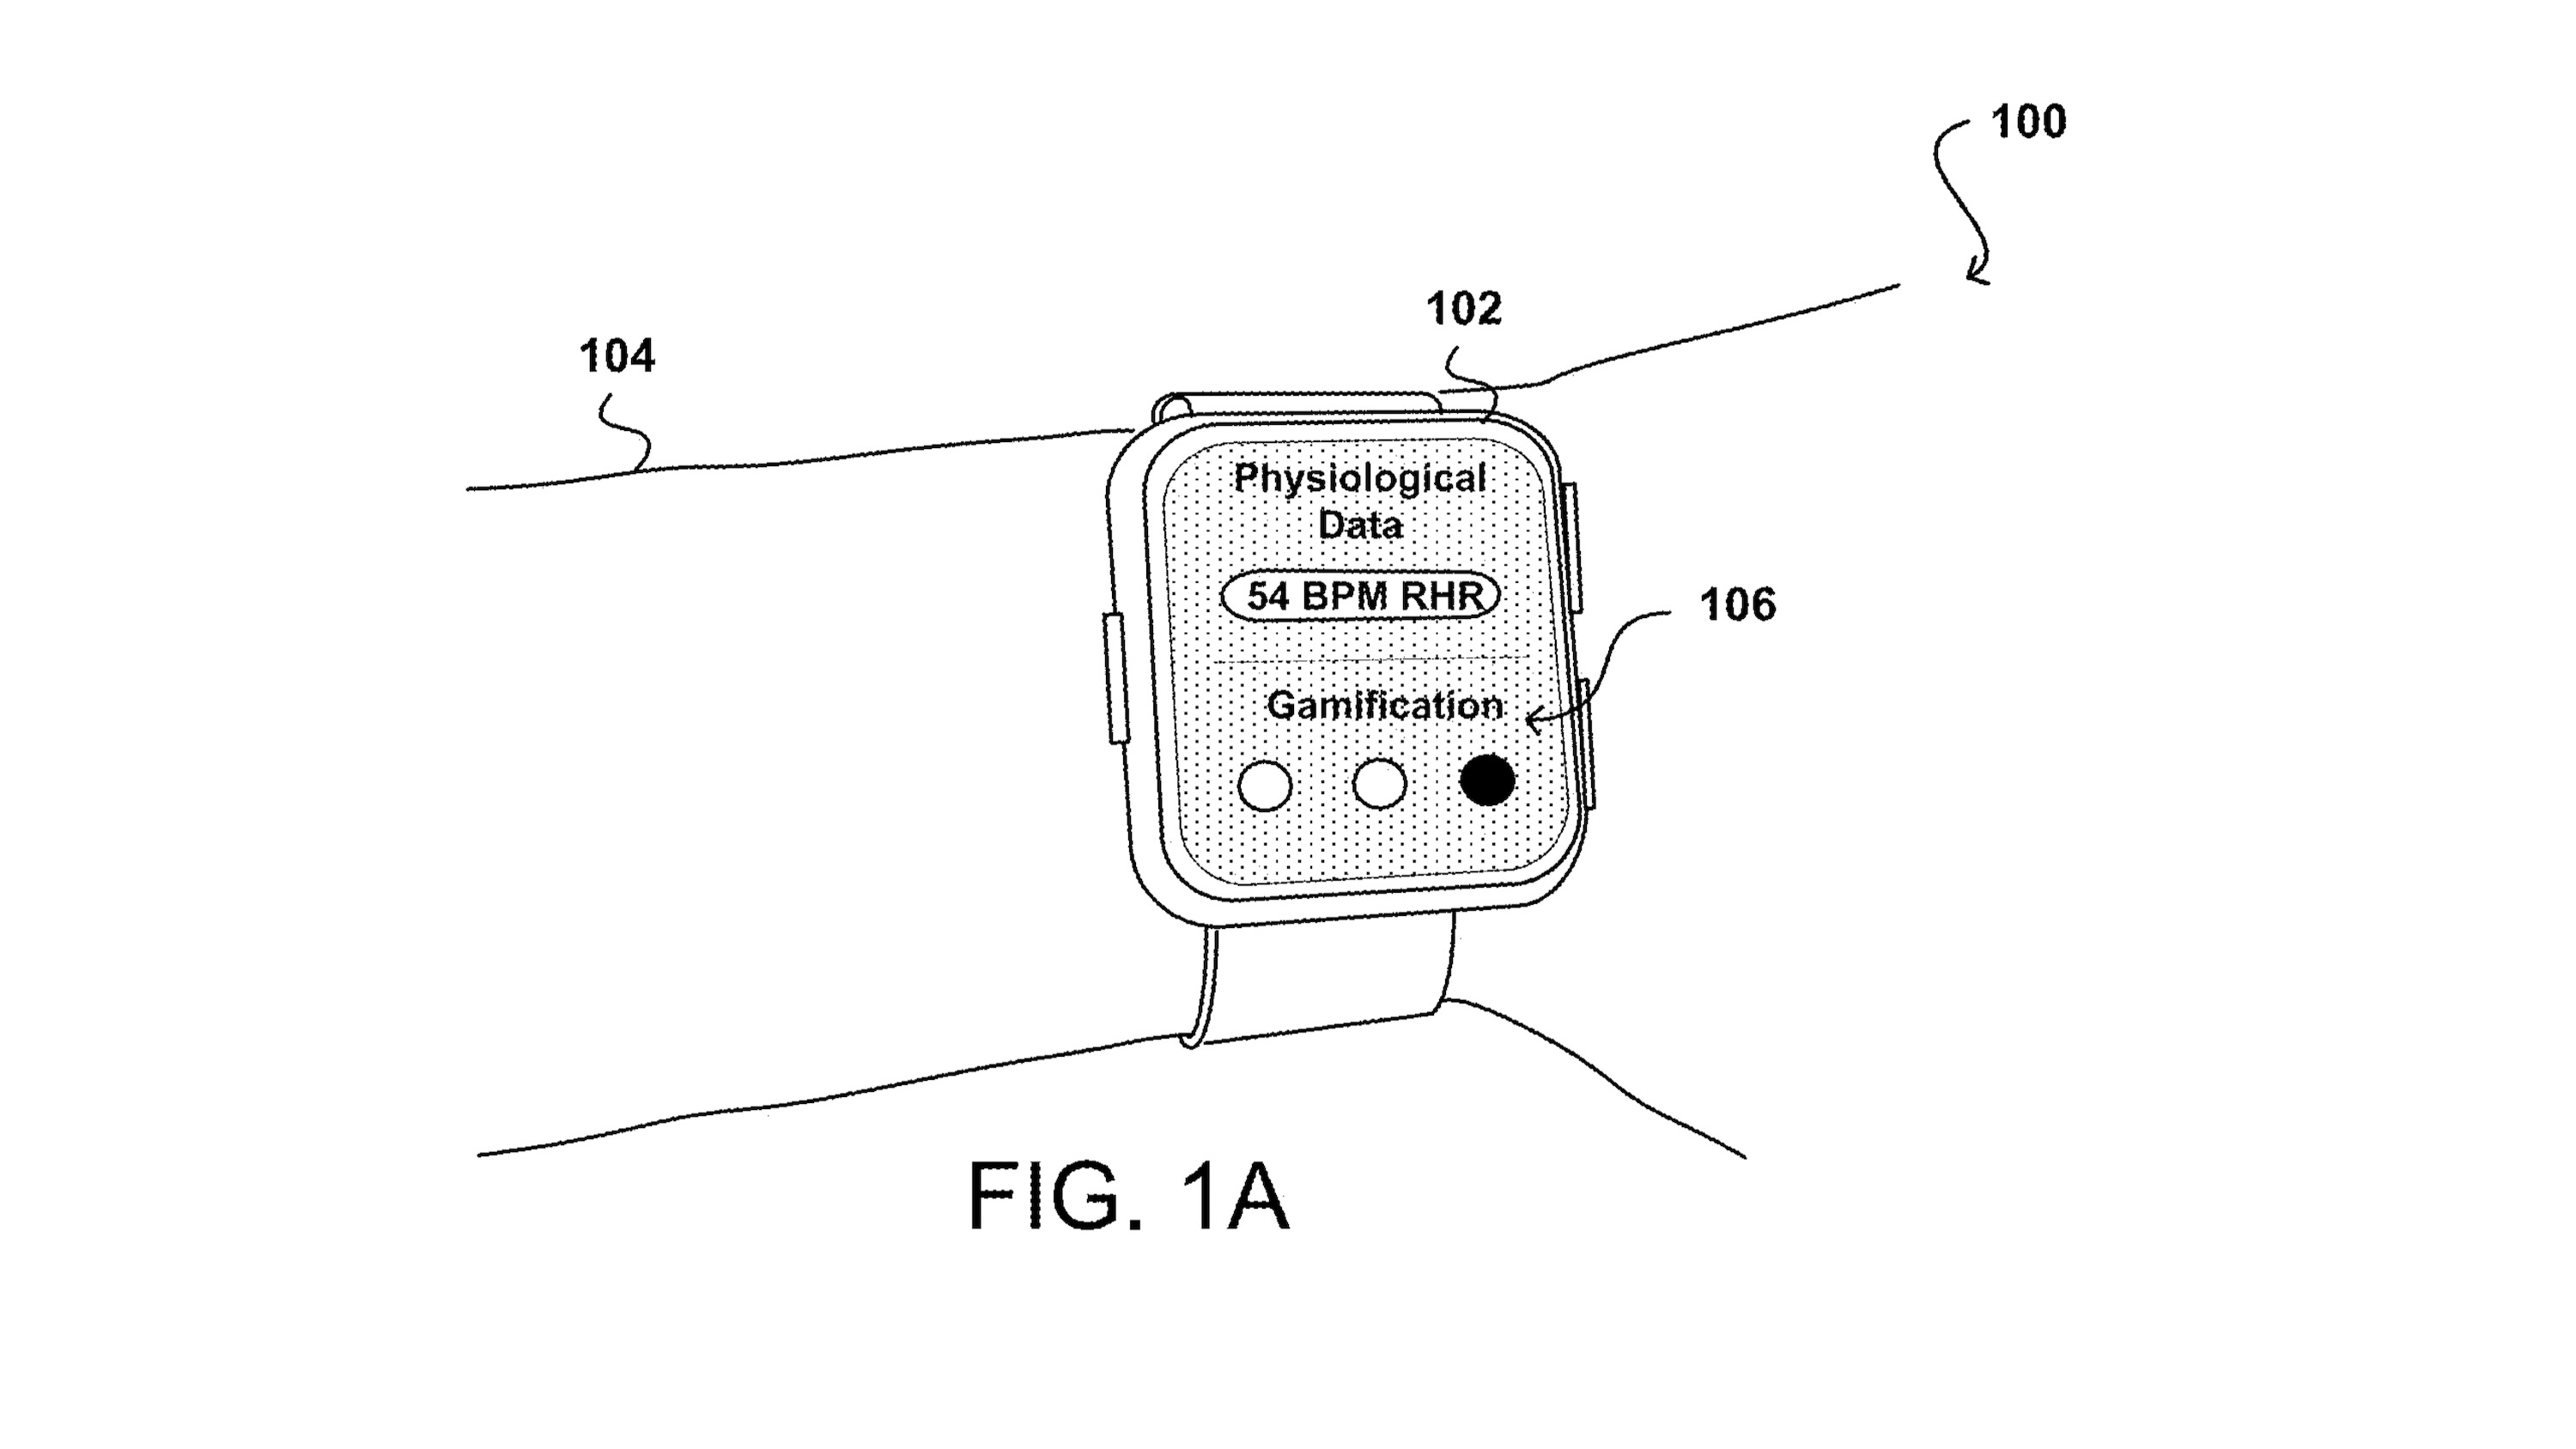 A patent figure showing a smartwatch display, with the user's heart rate visible, as well as a 